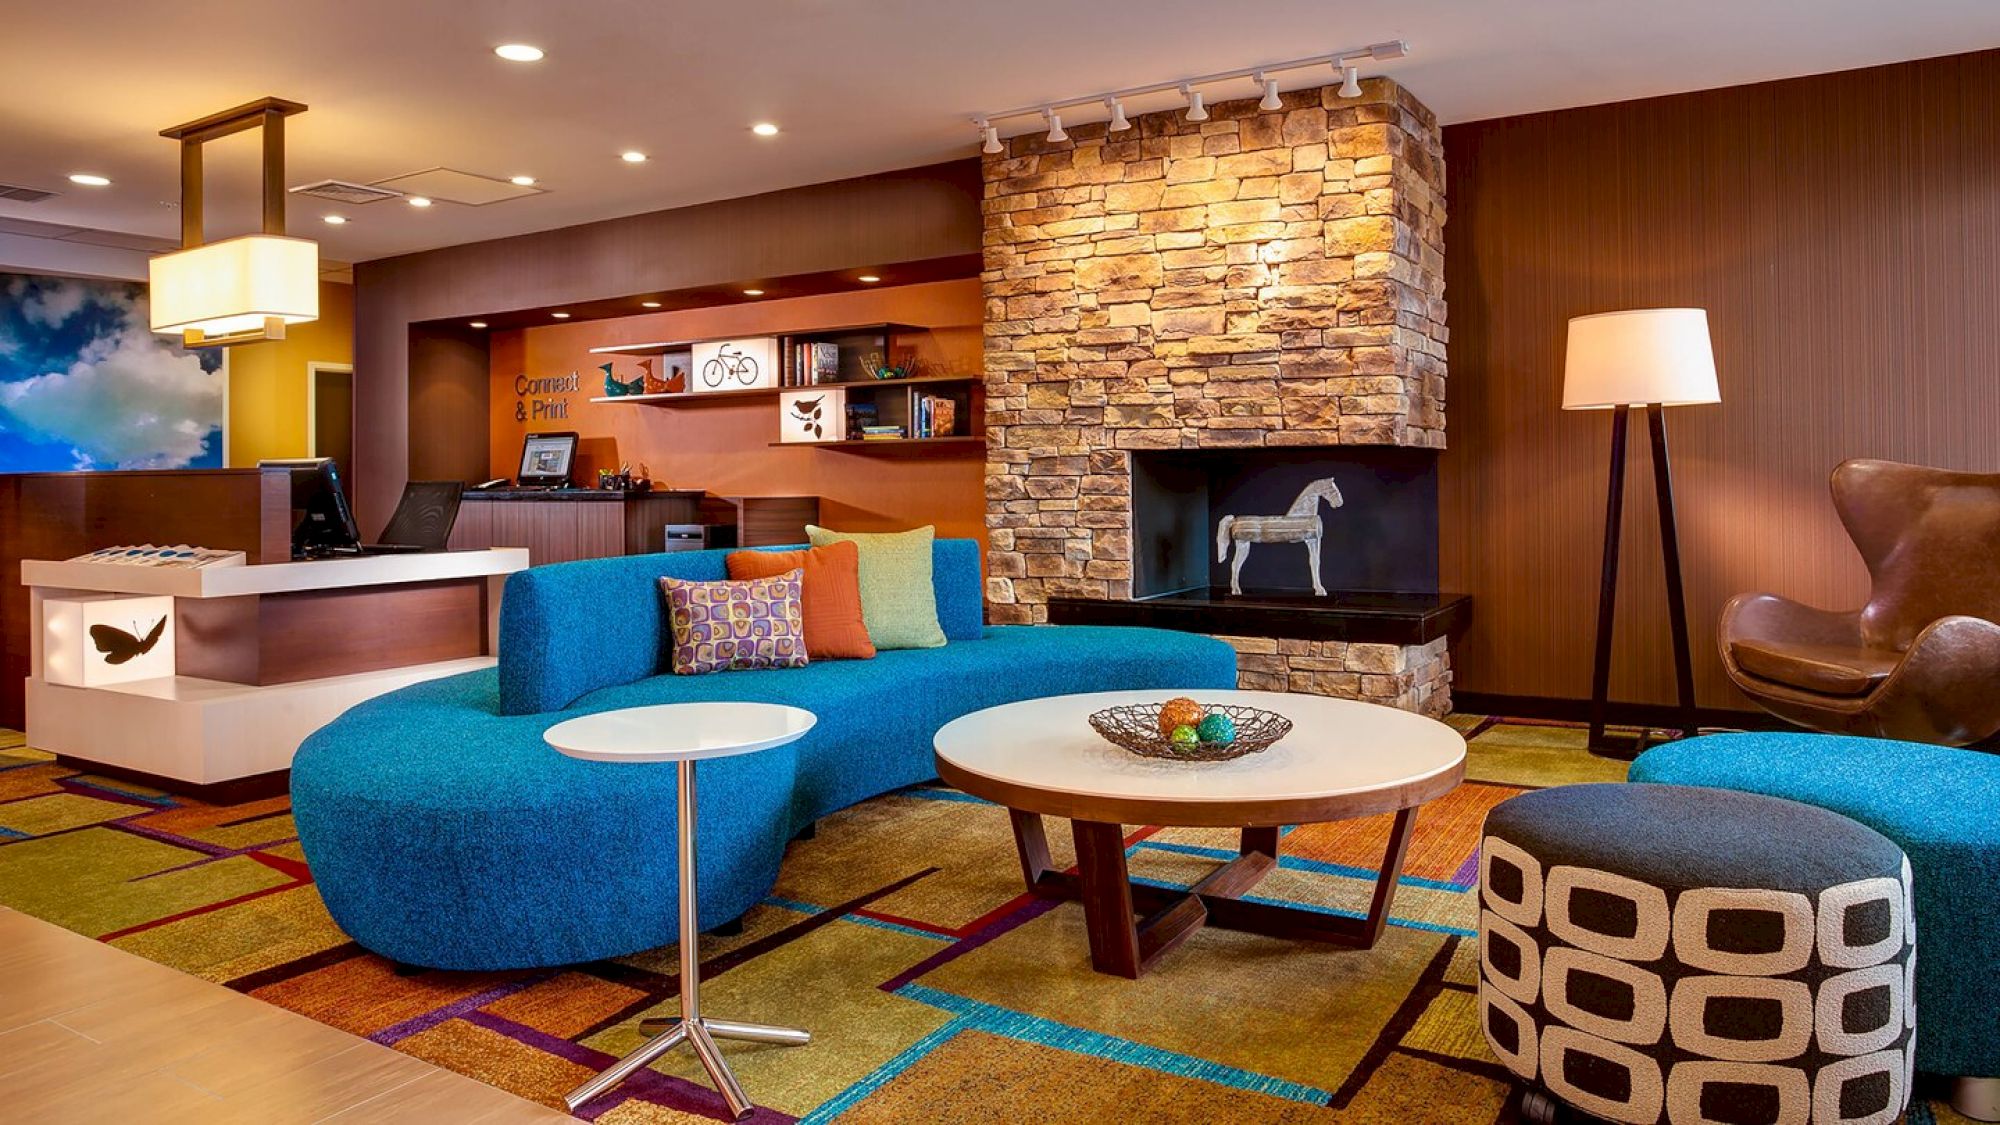 Modern hotel lobby with a blue curved sofa, colorful cushions, a stone fireplace, abstract décor, and contemporary furniture and lighting fixtures.